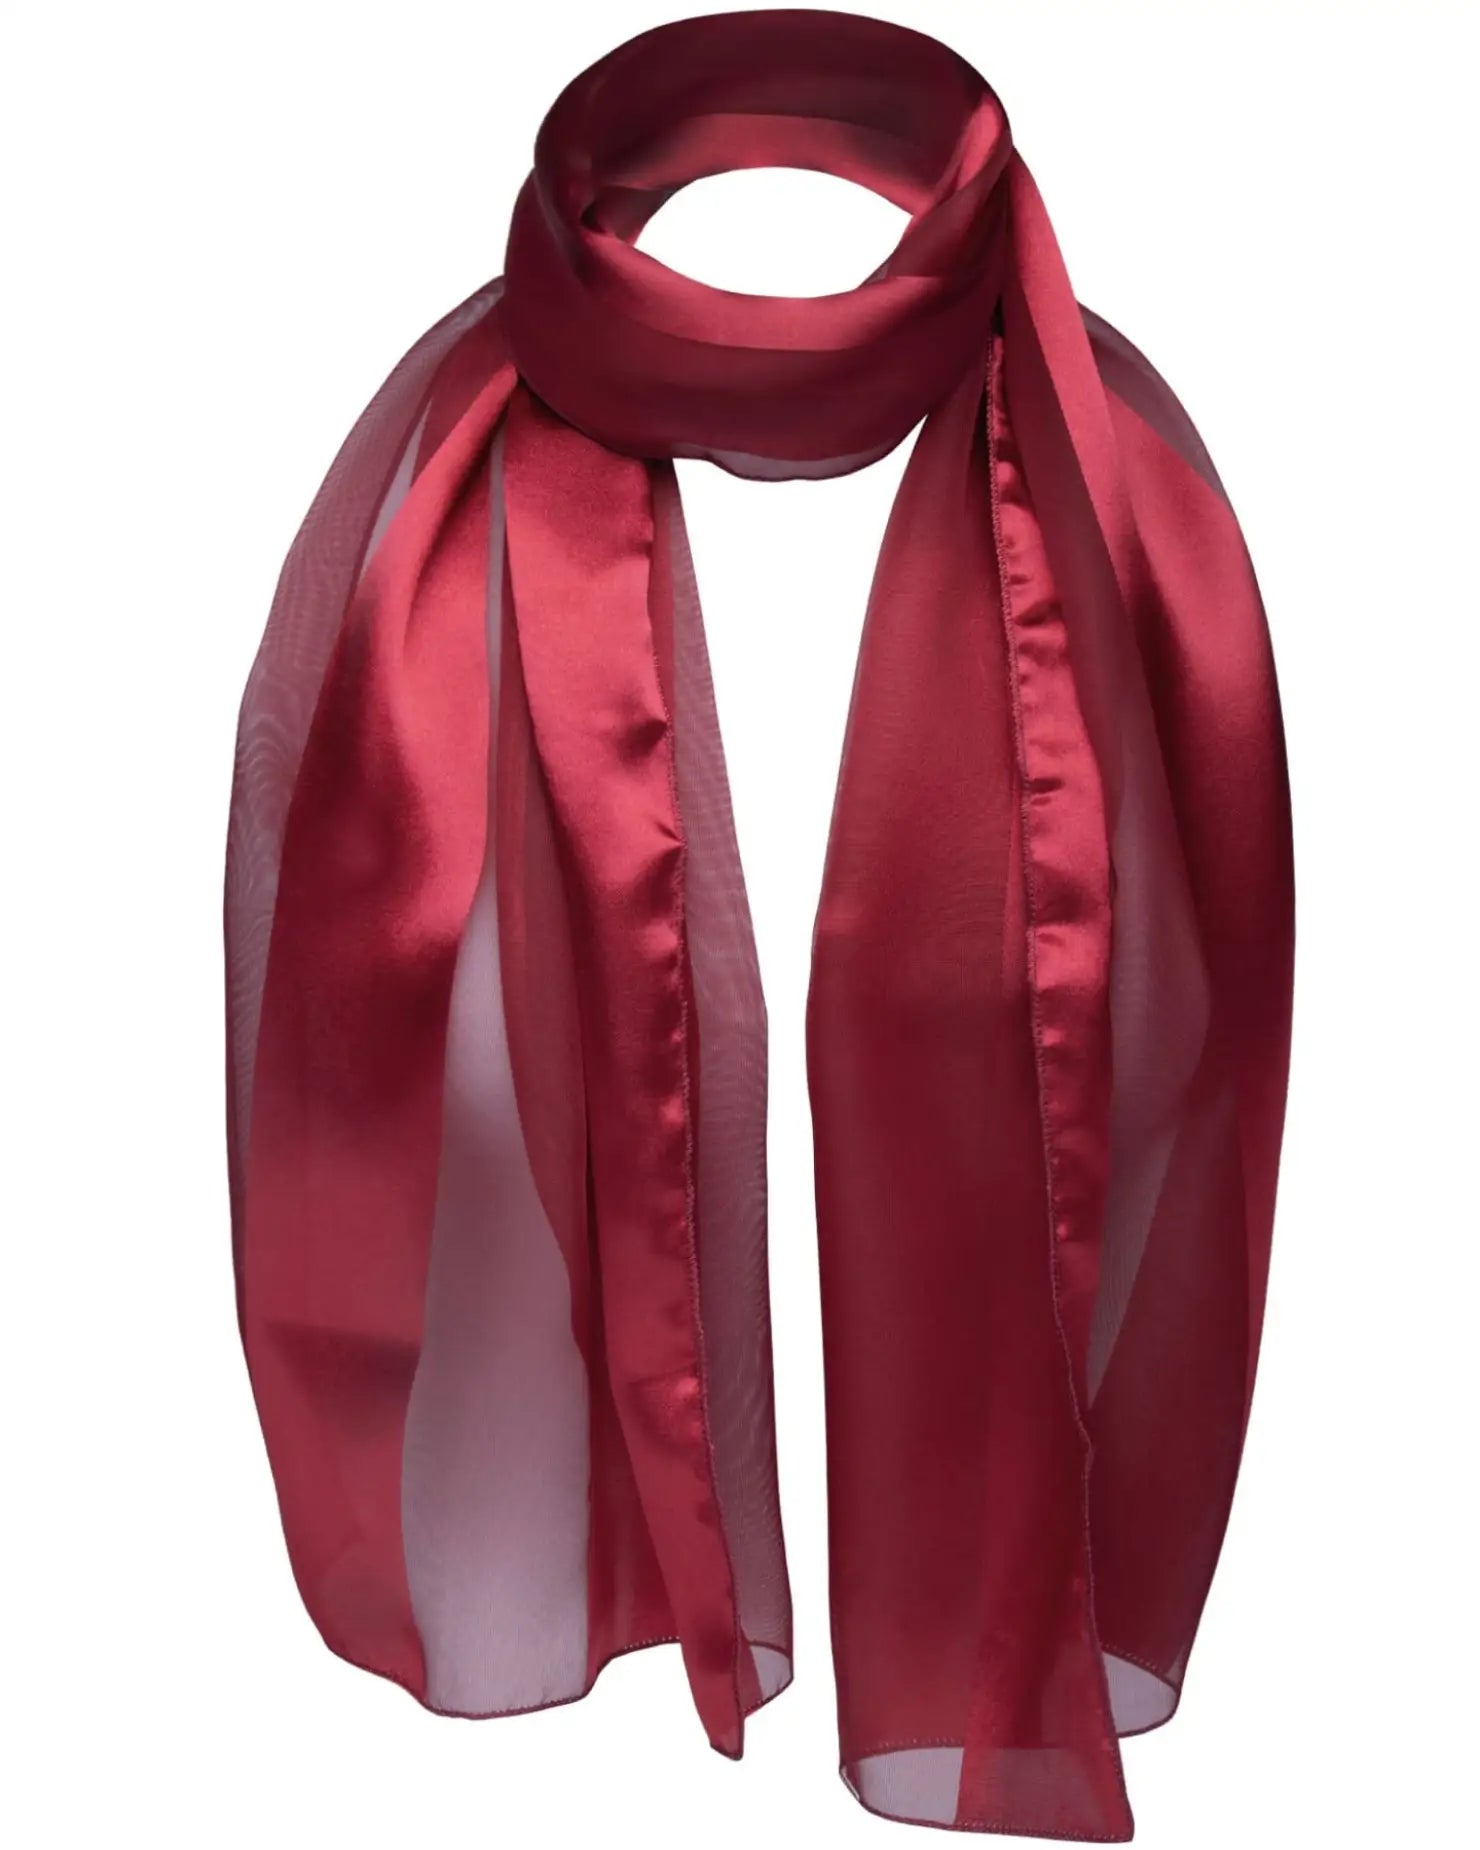 Solid Shimmering Satin Stripe Scarf with Red and White Design